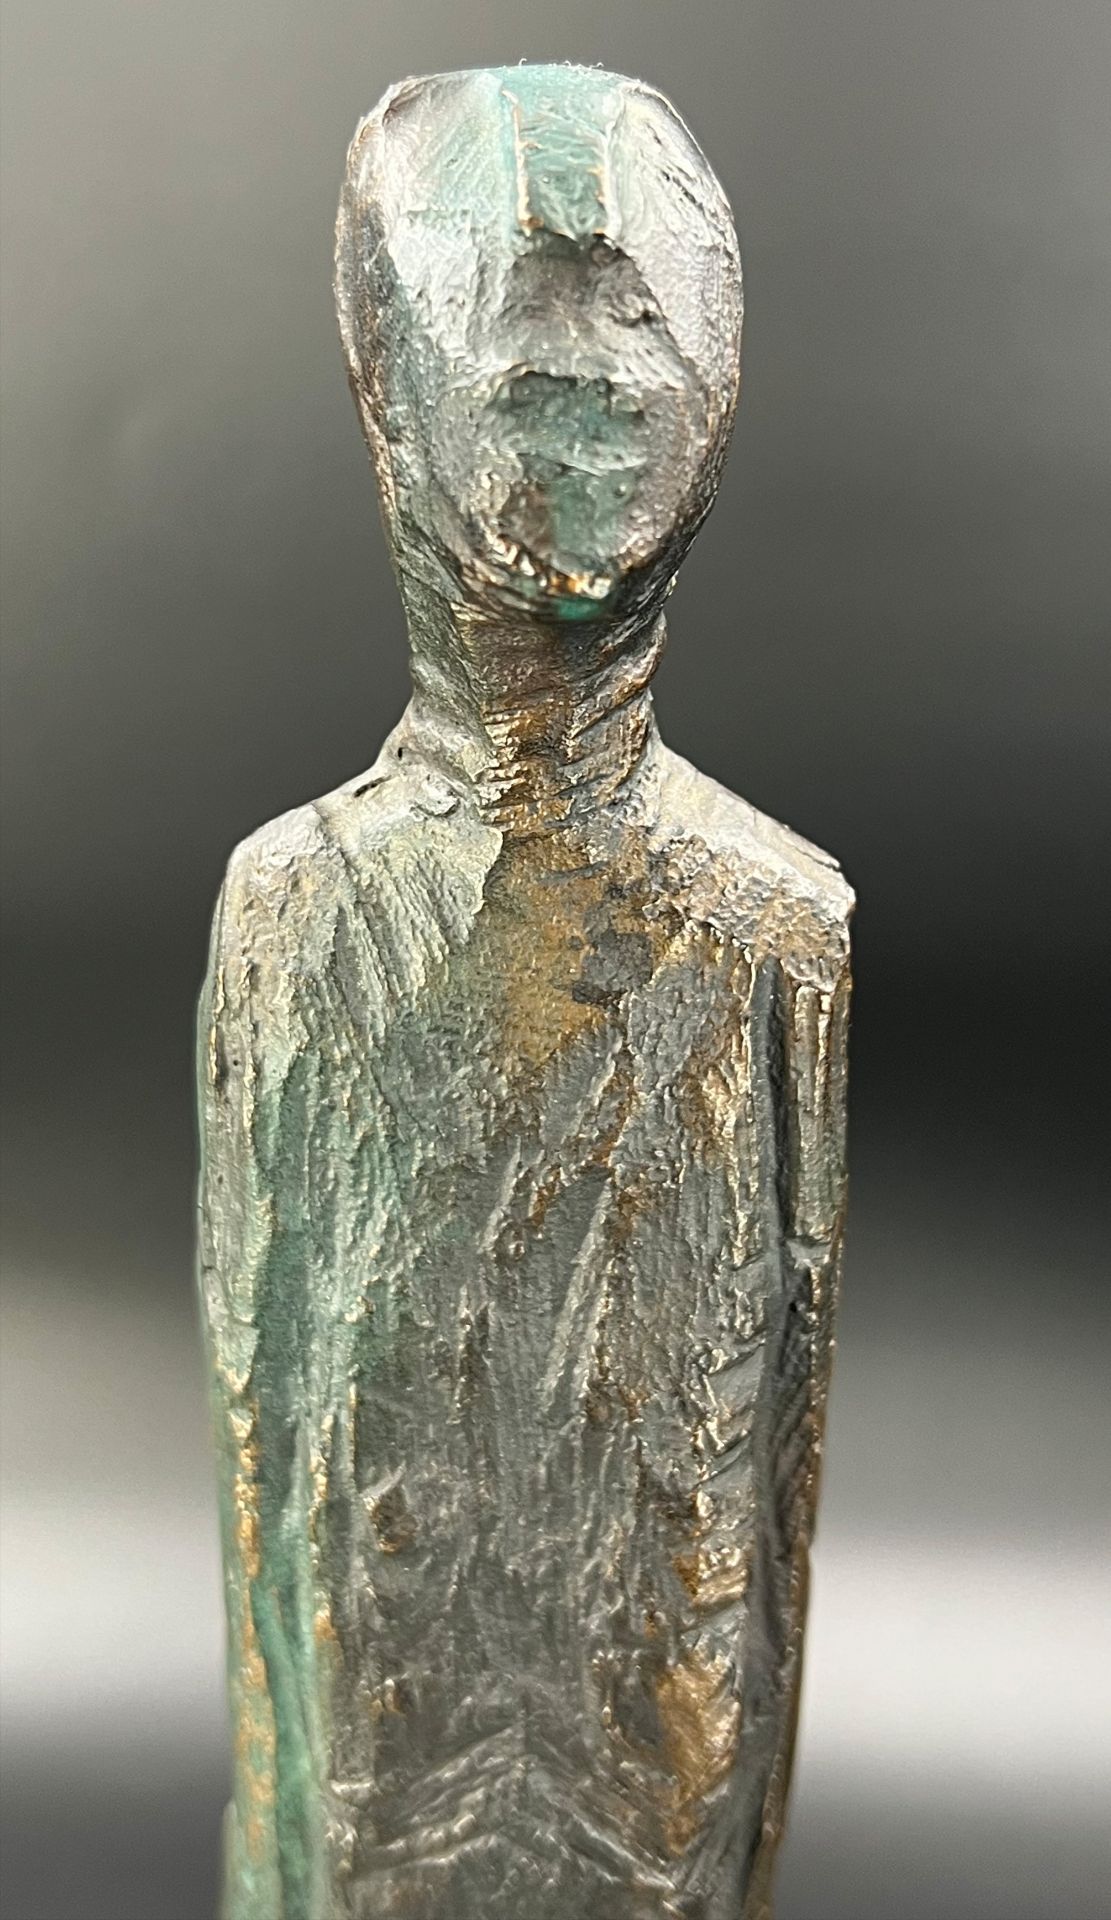 Walter SCHEMBS (1956). Bronze. "Small stele". - Image 7 of 10